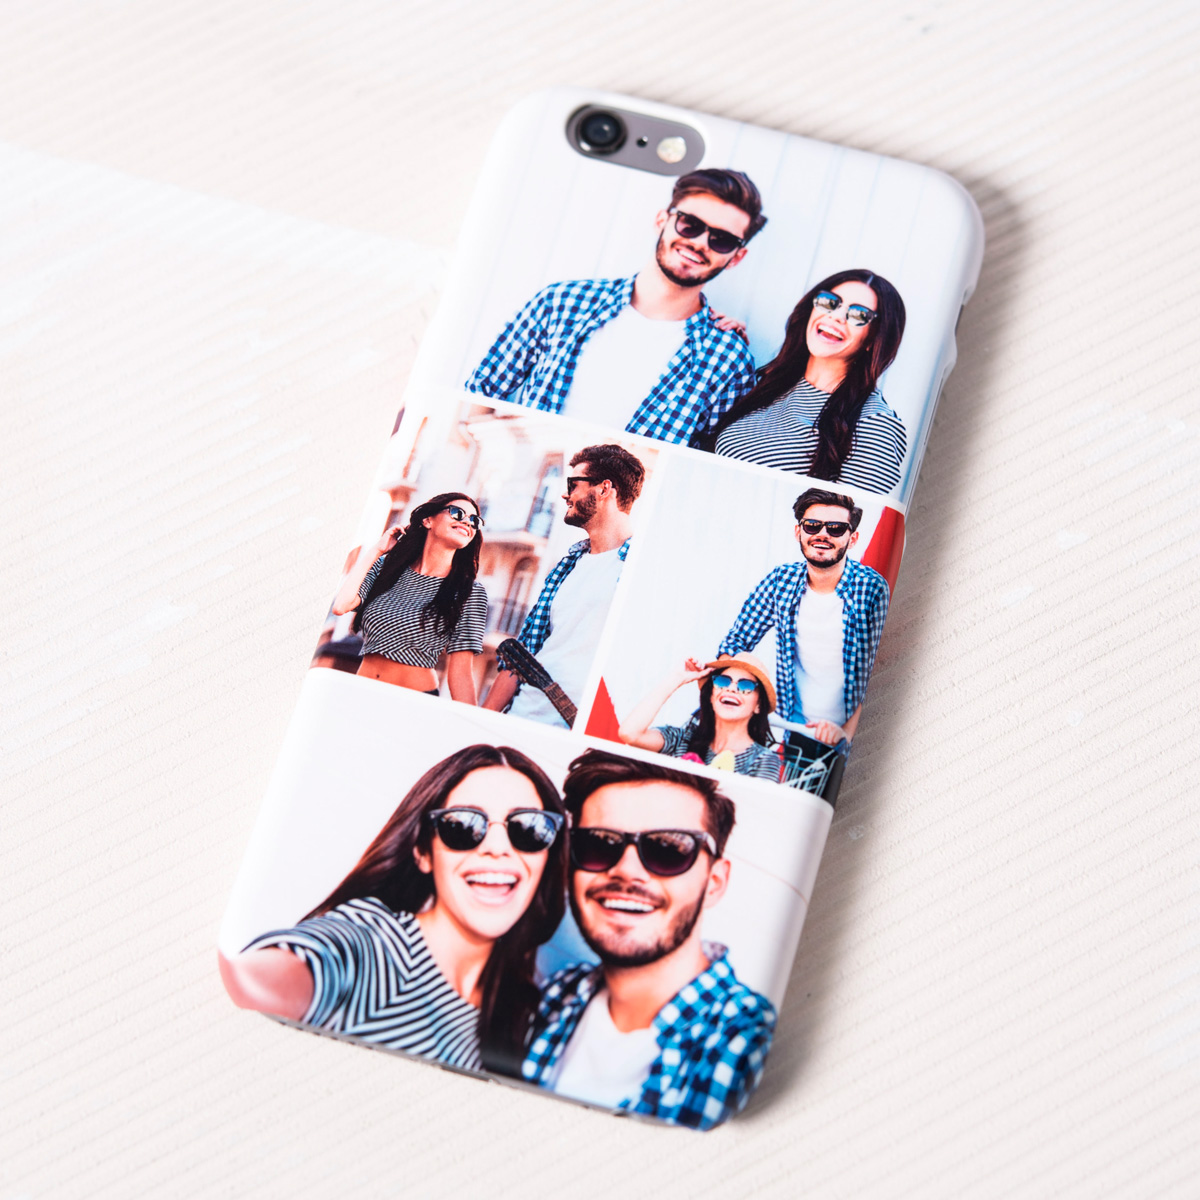 Create Your Own Multi Photo Upload iPhone Snap Cover